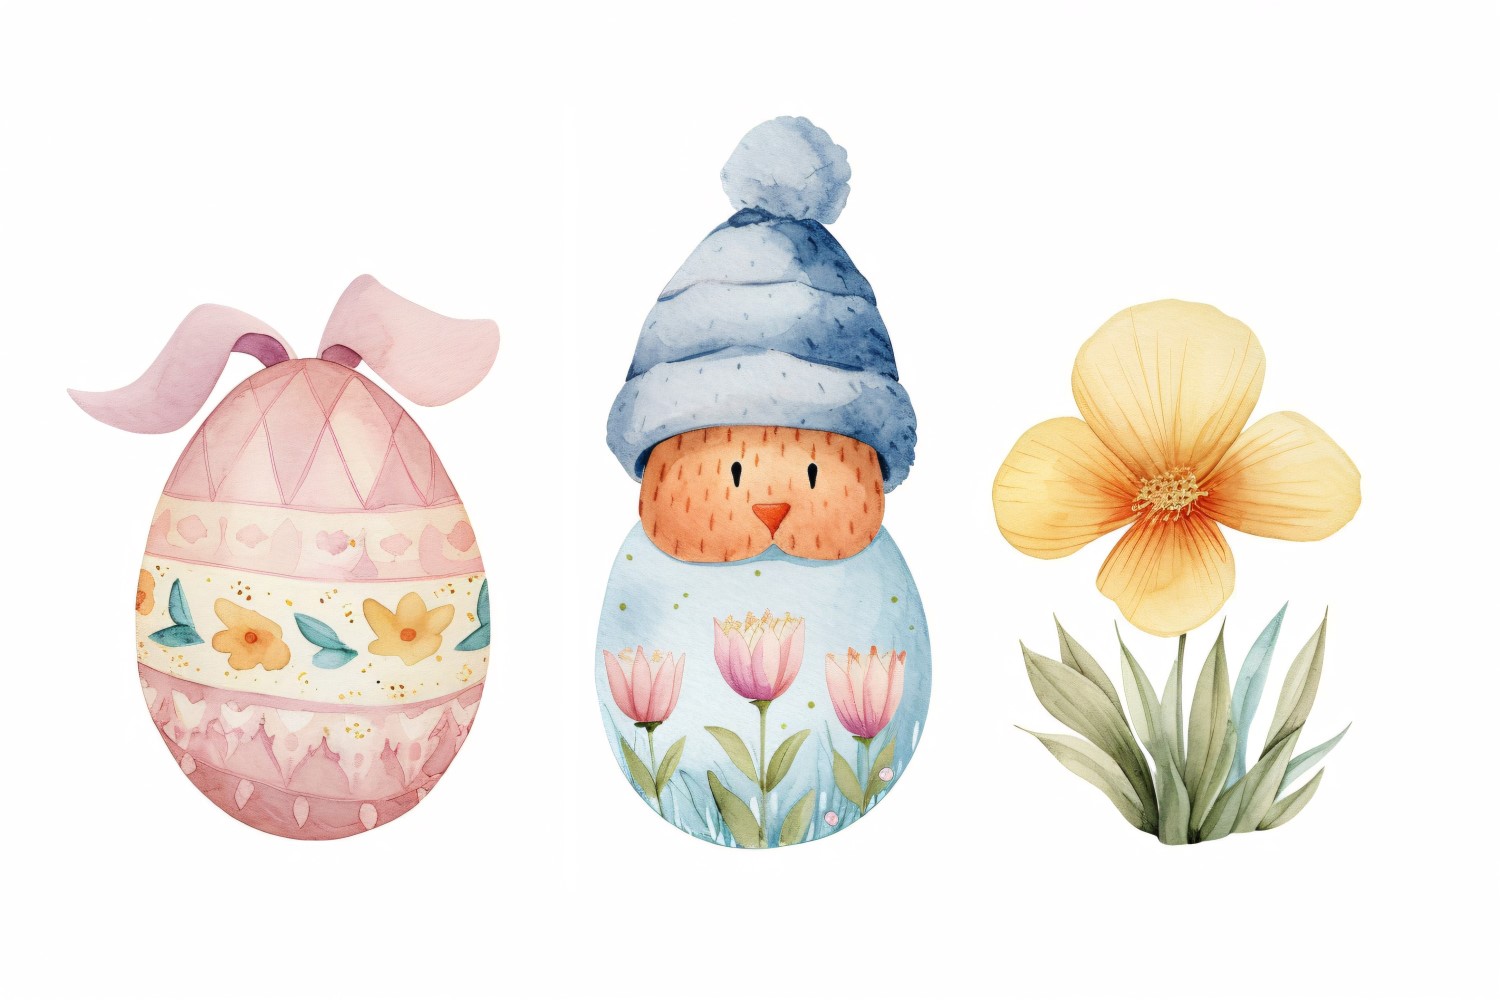 Decorative Eggs With A Hat On His Eyes Near Giant Easter Egg 122